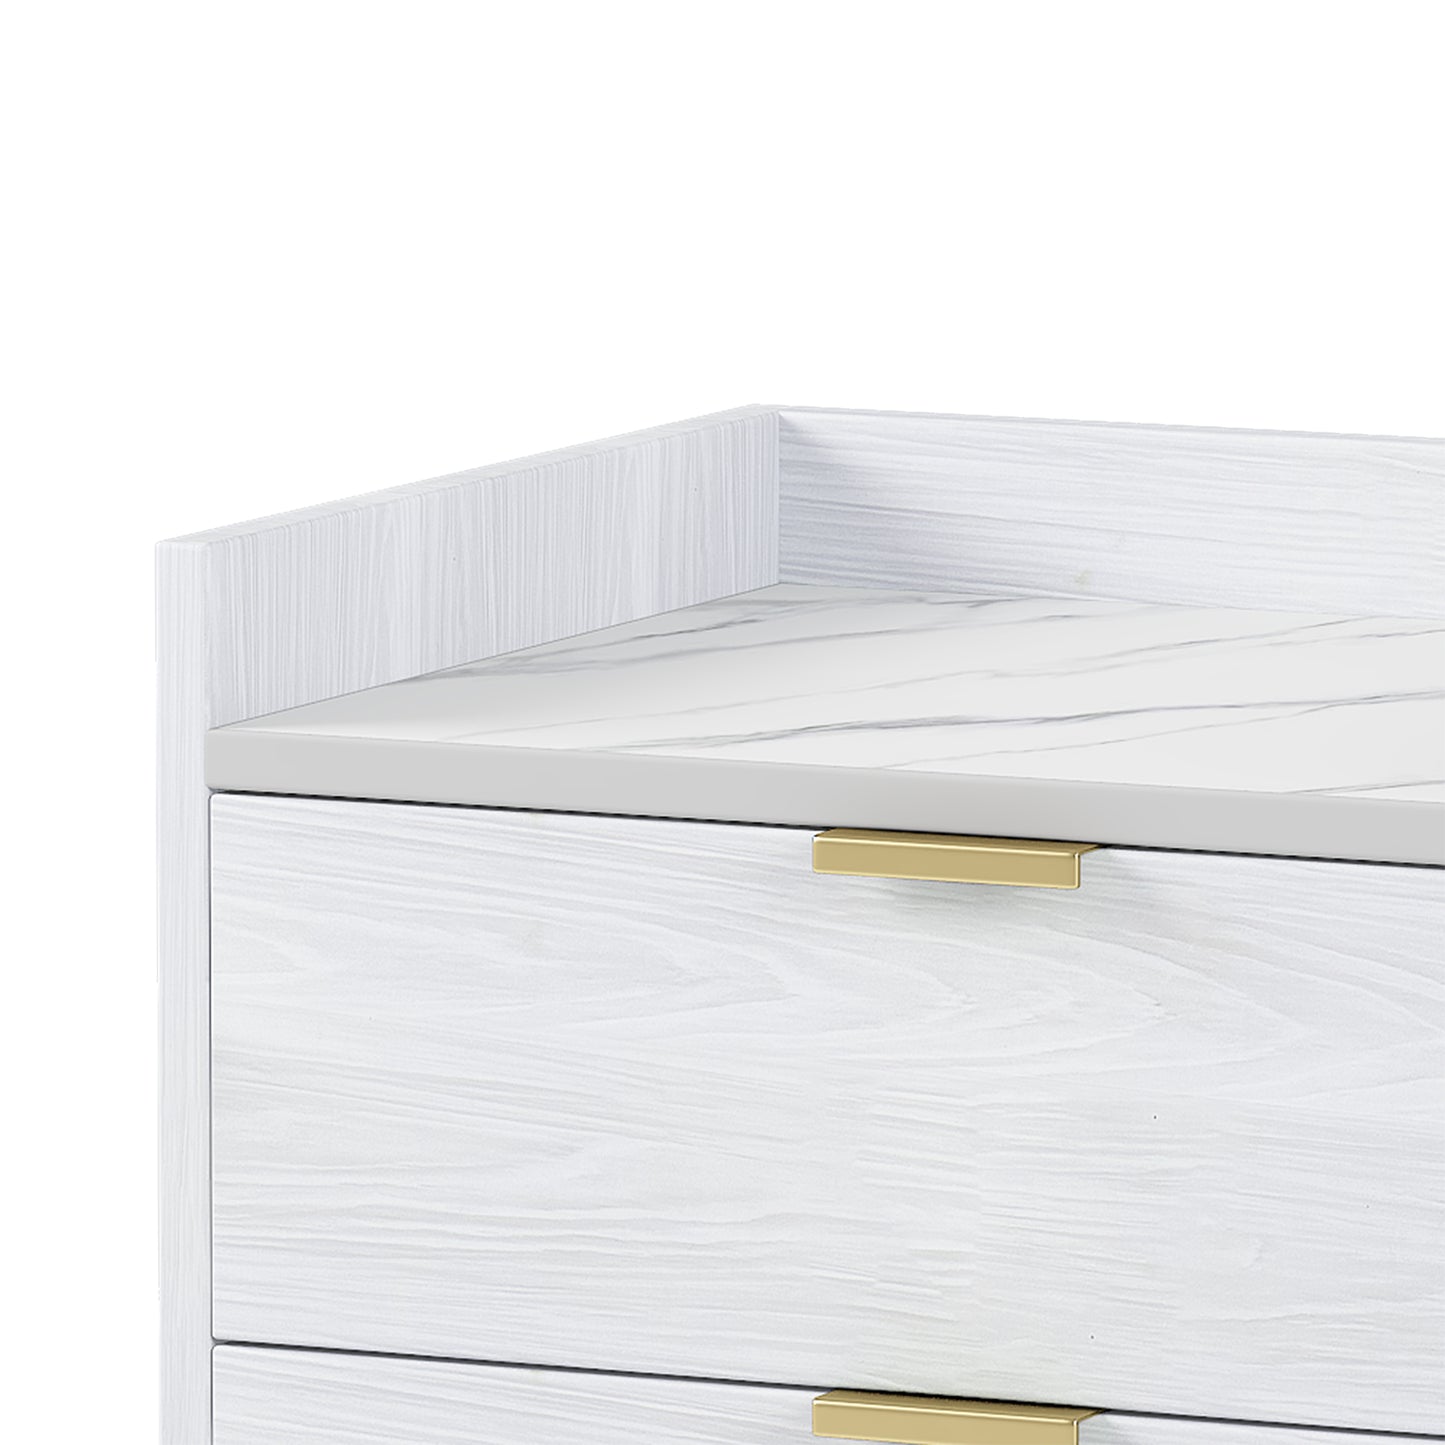 Mordern Wood Bedside Table with Metal Legs&Handles in White Finish